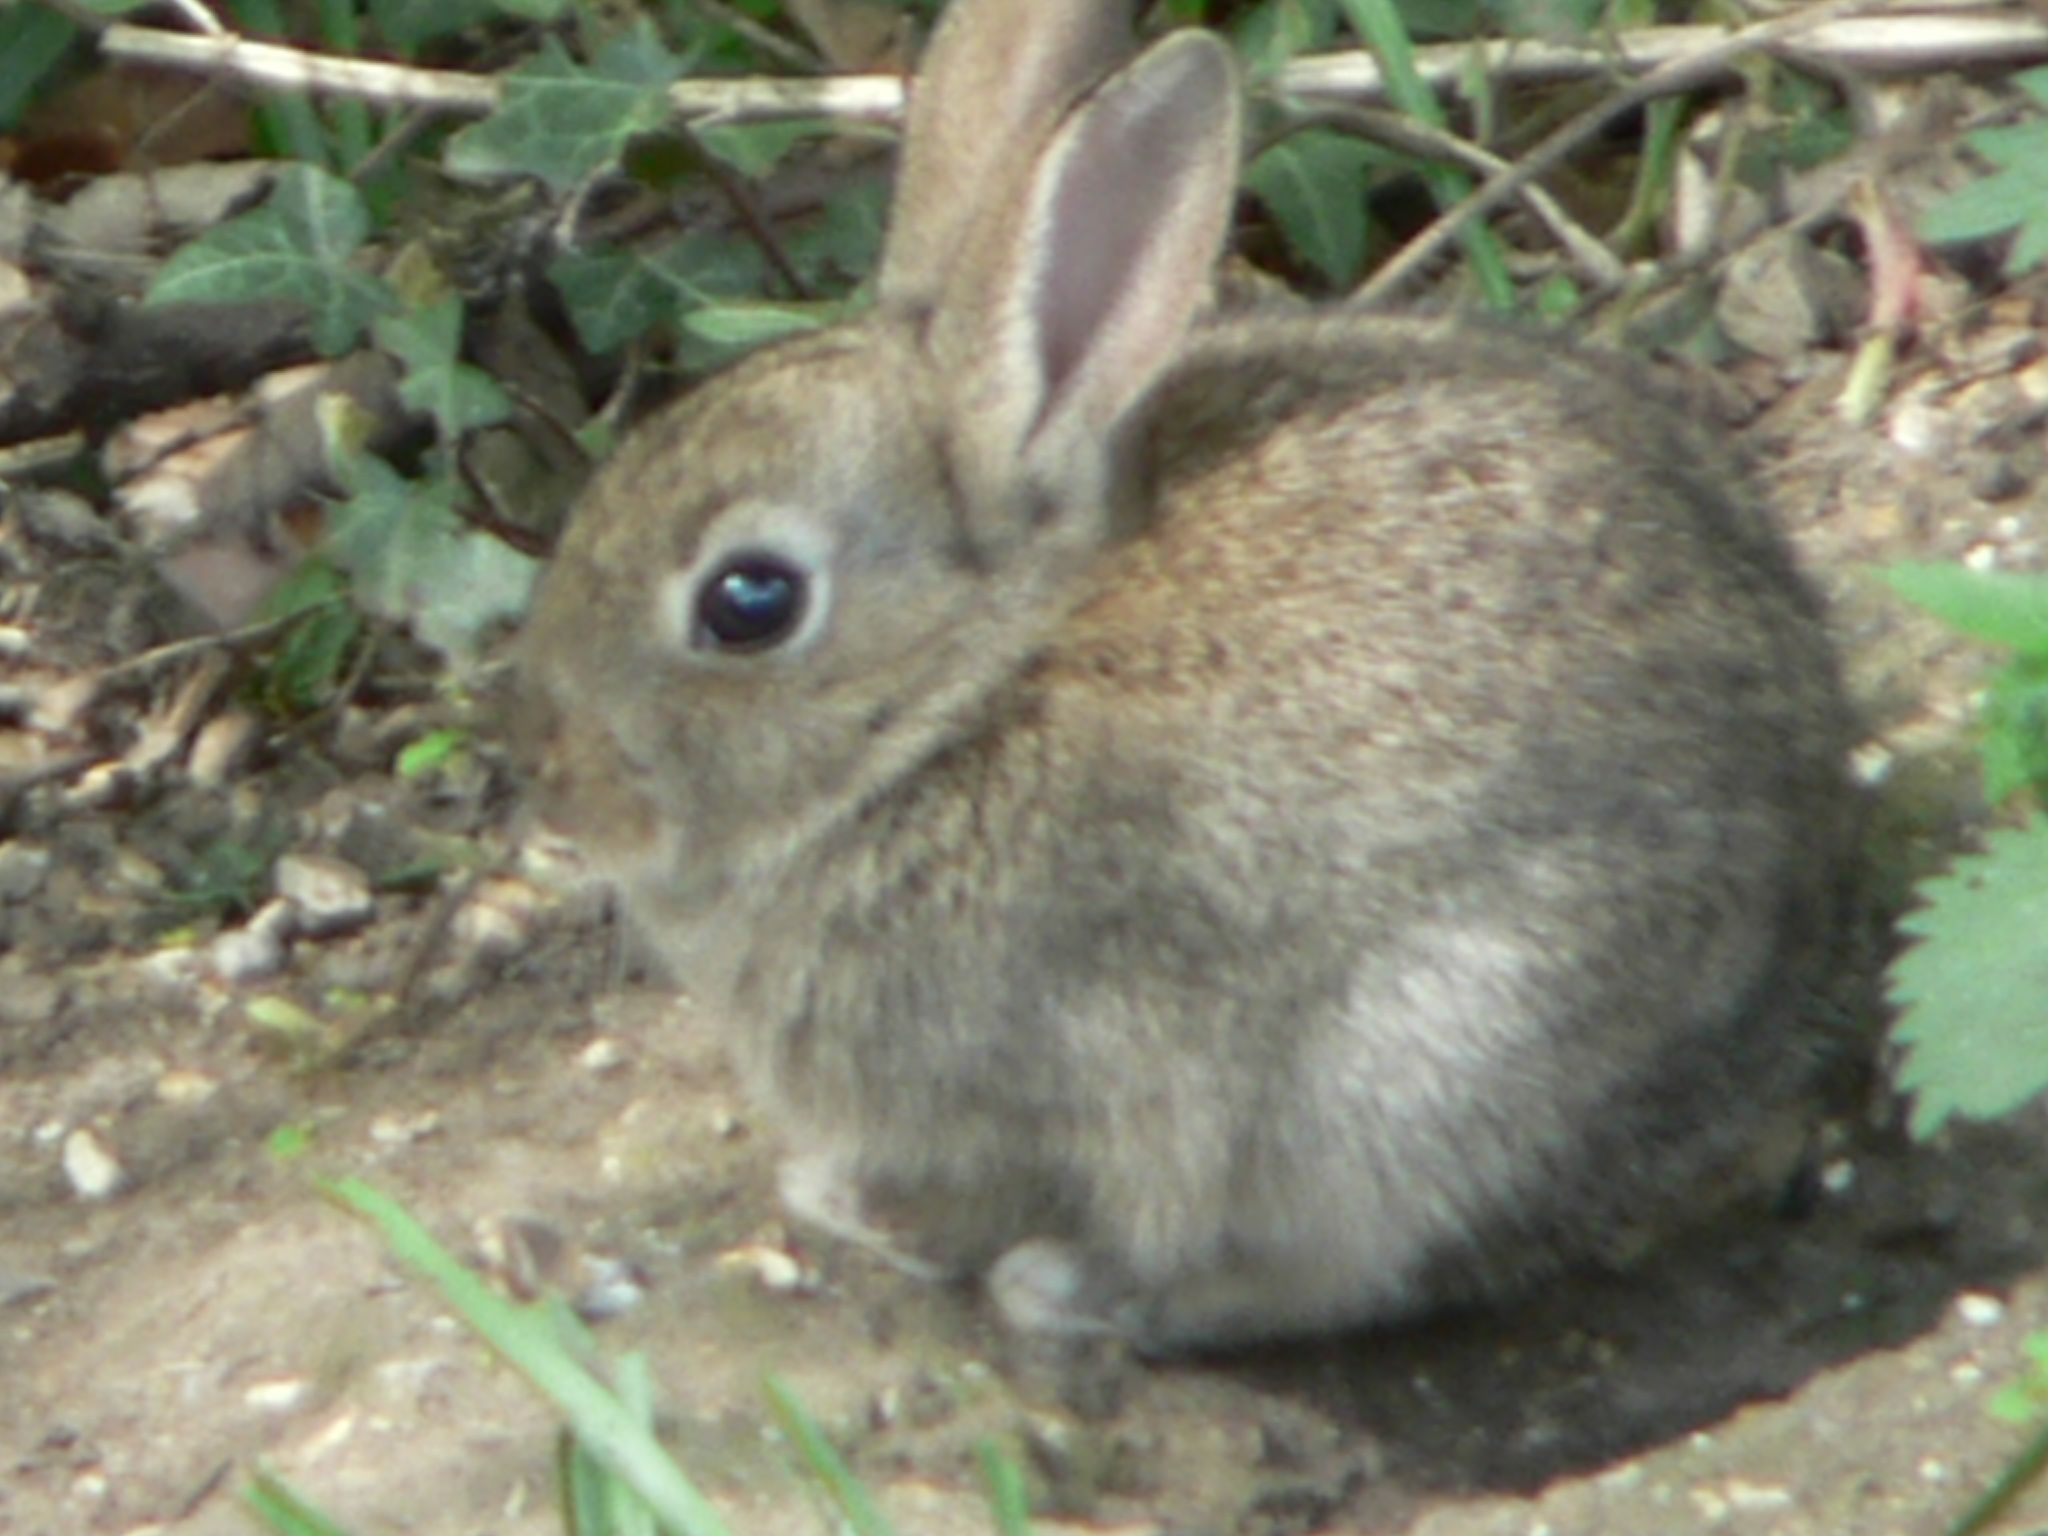 a rabbit is sitting on some dirt by plants